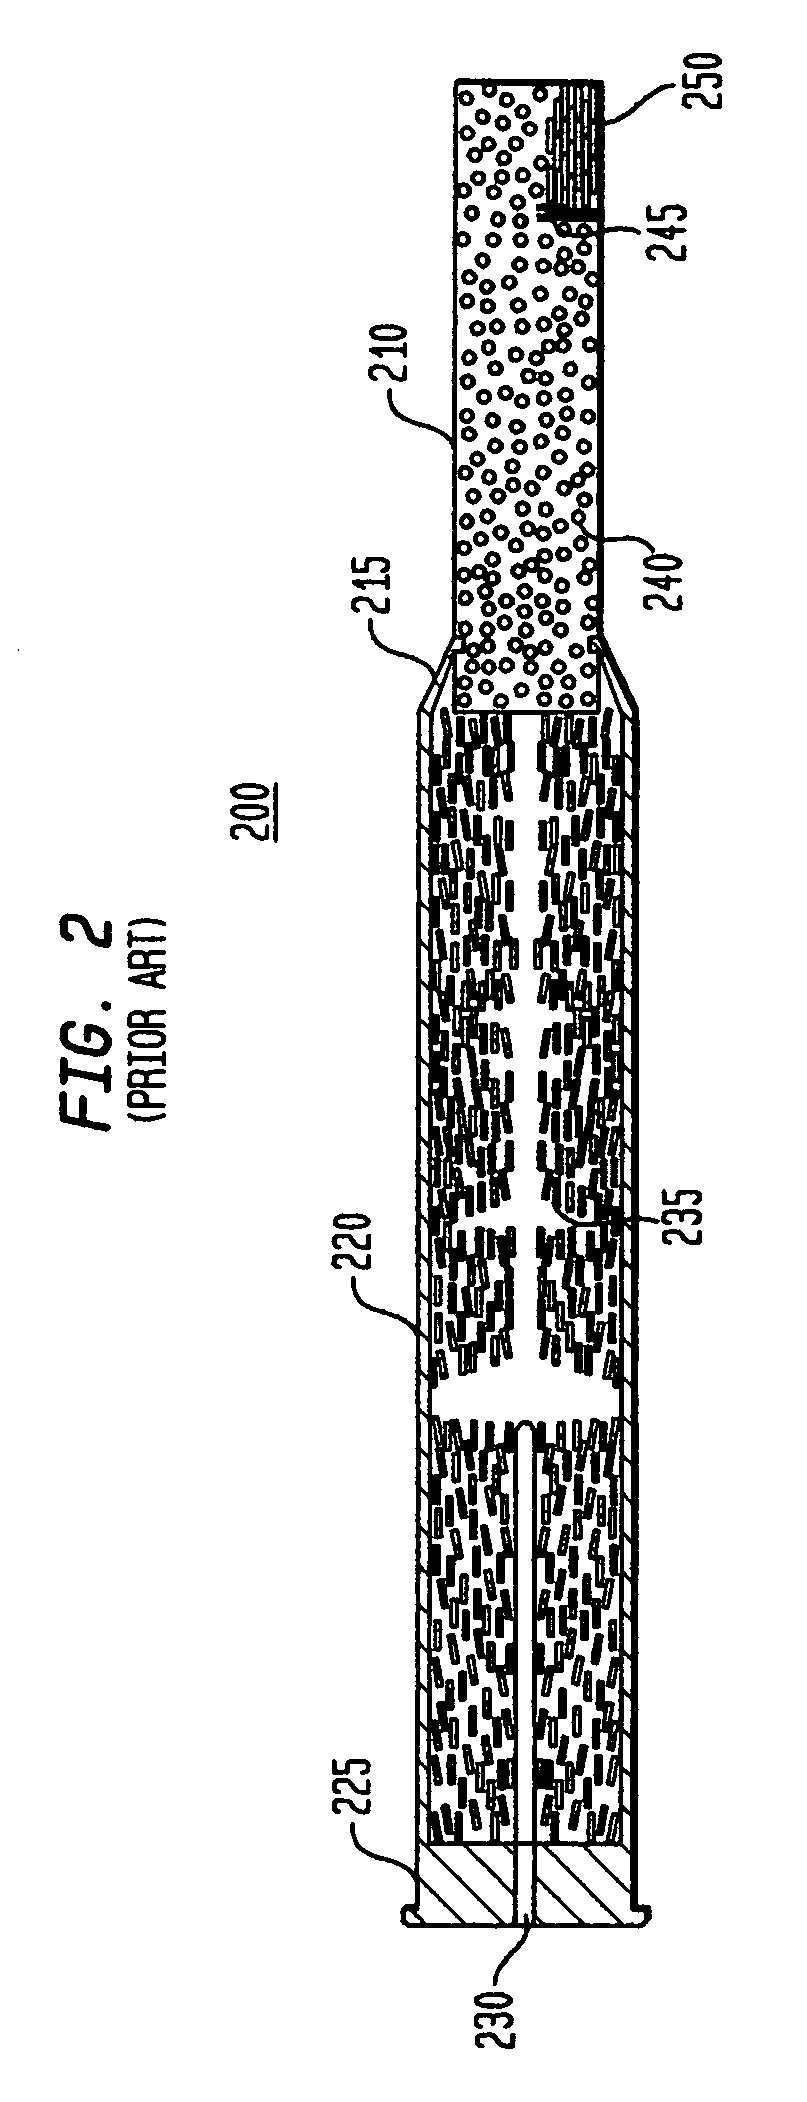 System and method for a flameless tracer / marker for ammunition housing multiple projectiles utilizing chemlucent chemicals